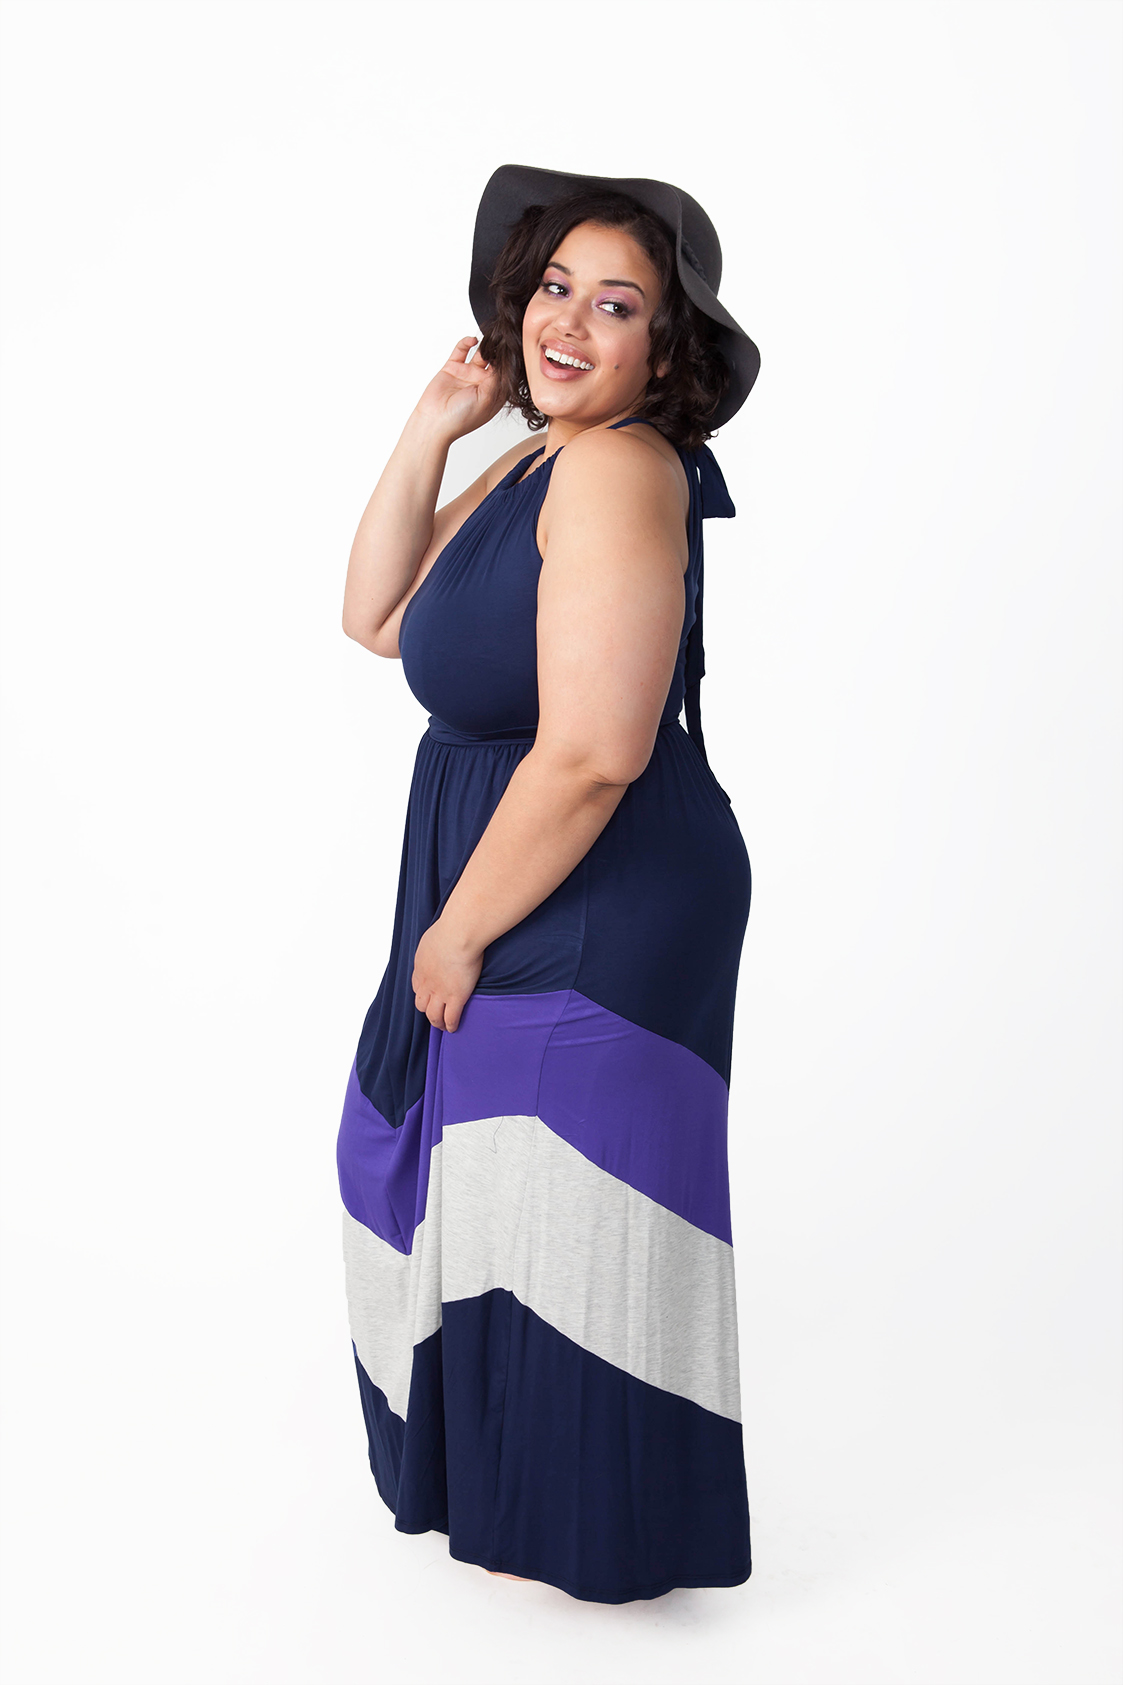 Chevron Plus Size Dress - Guide Of Selecting